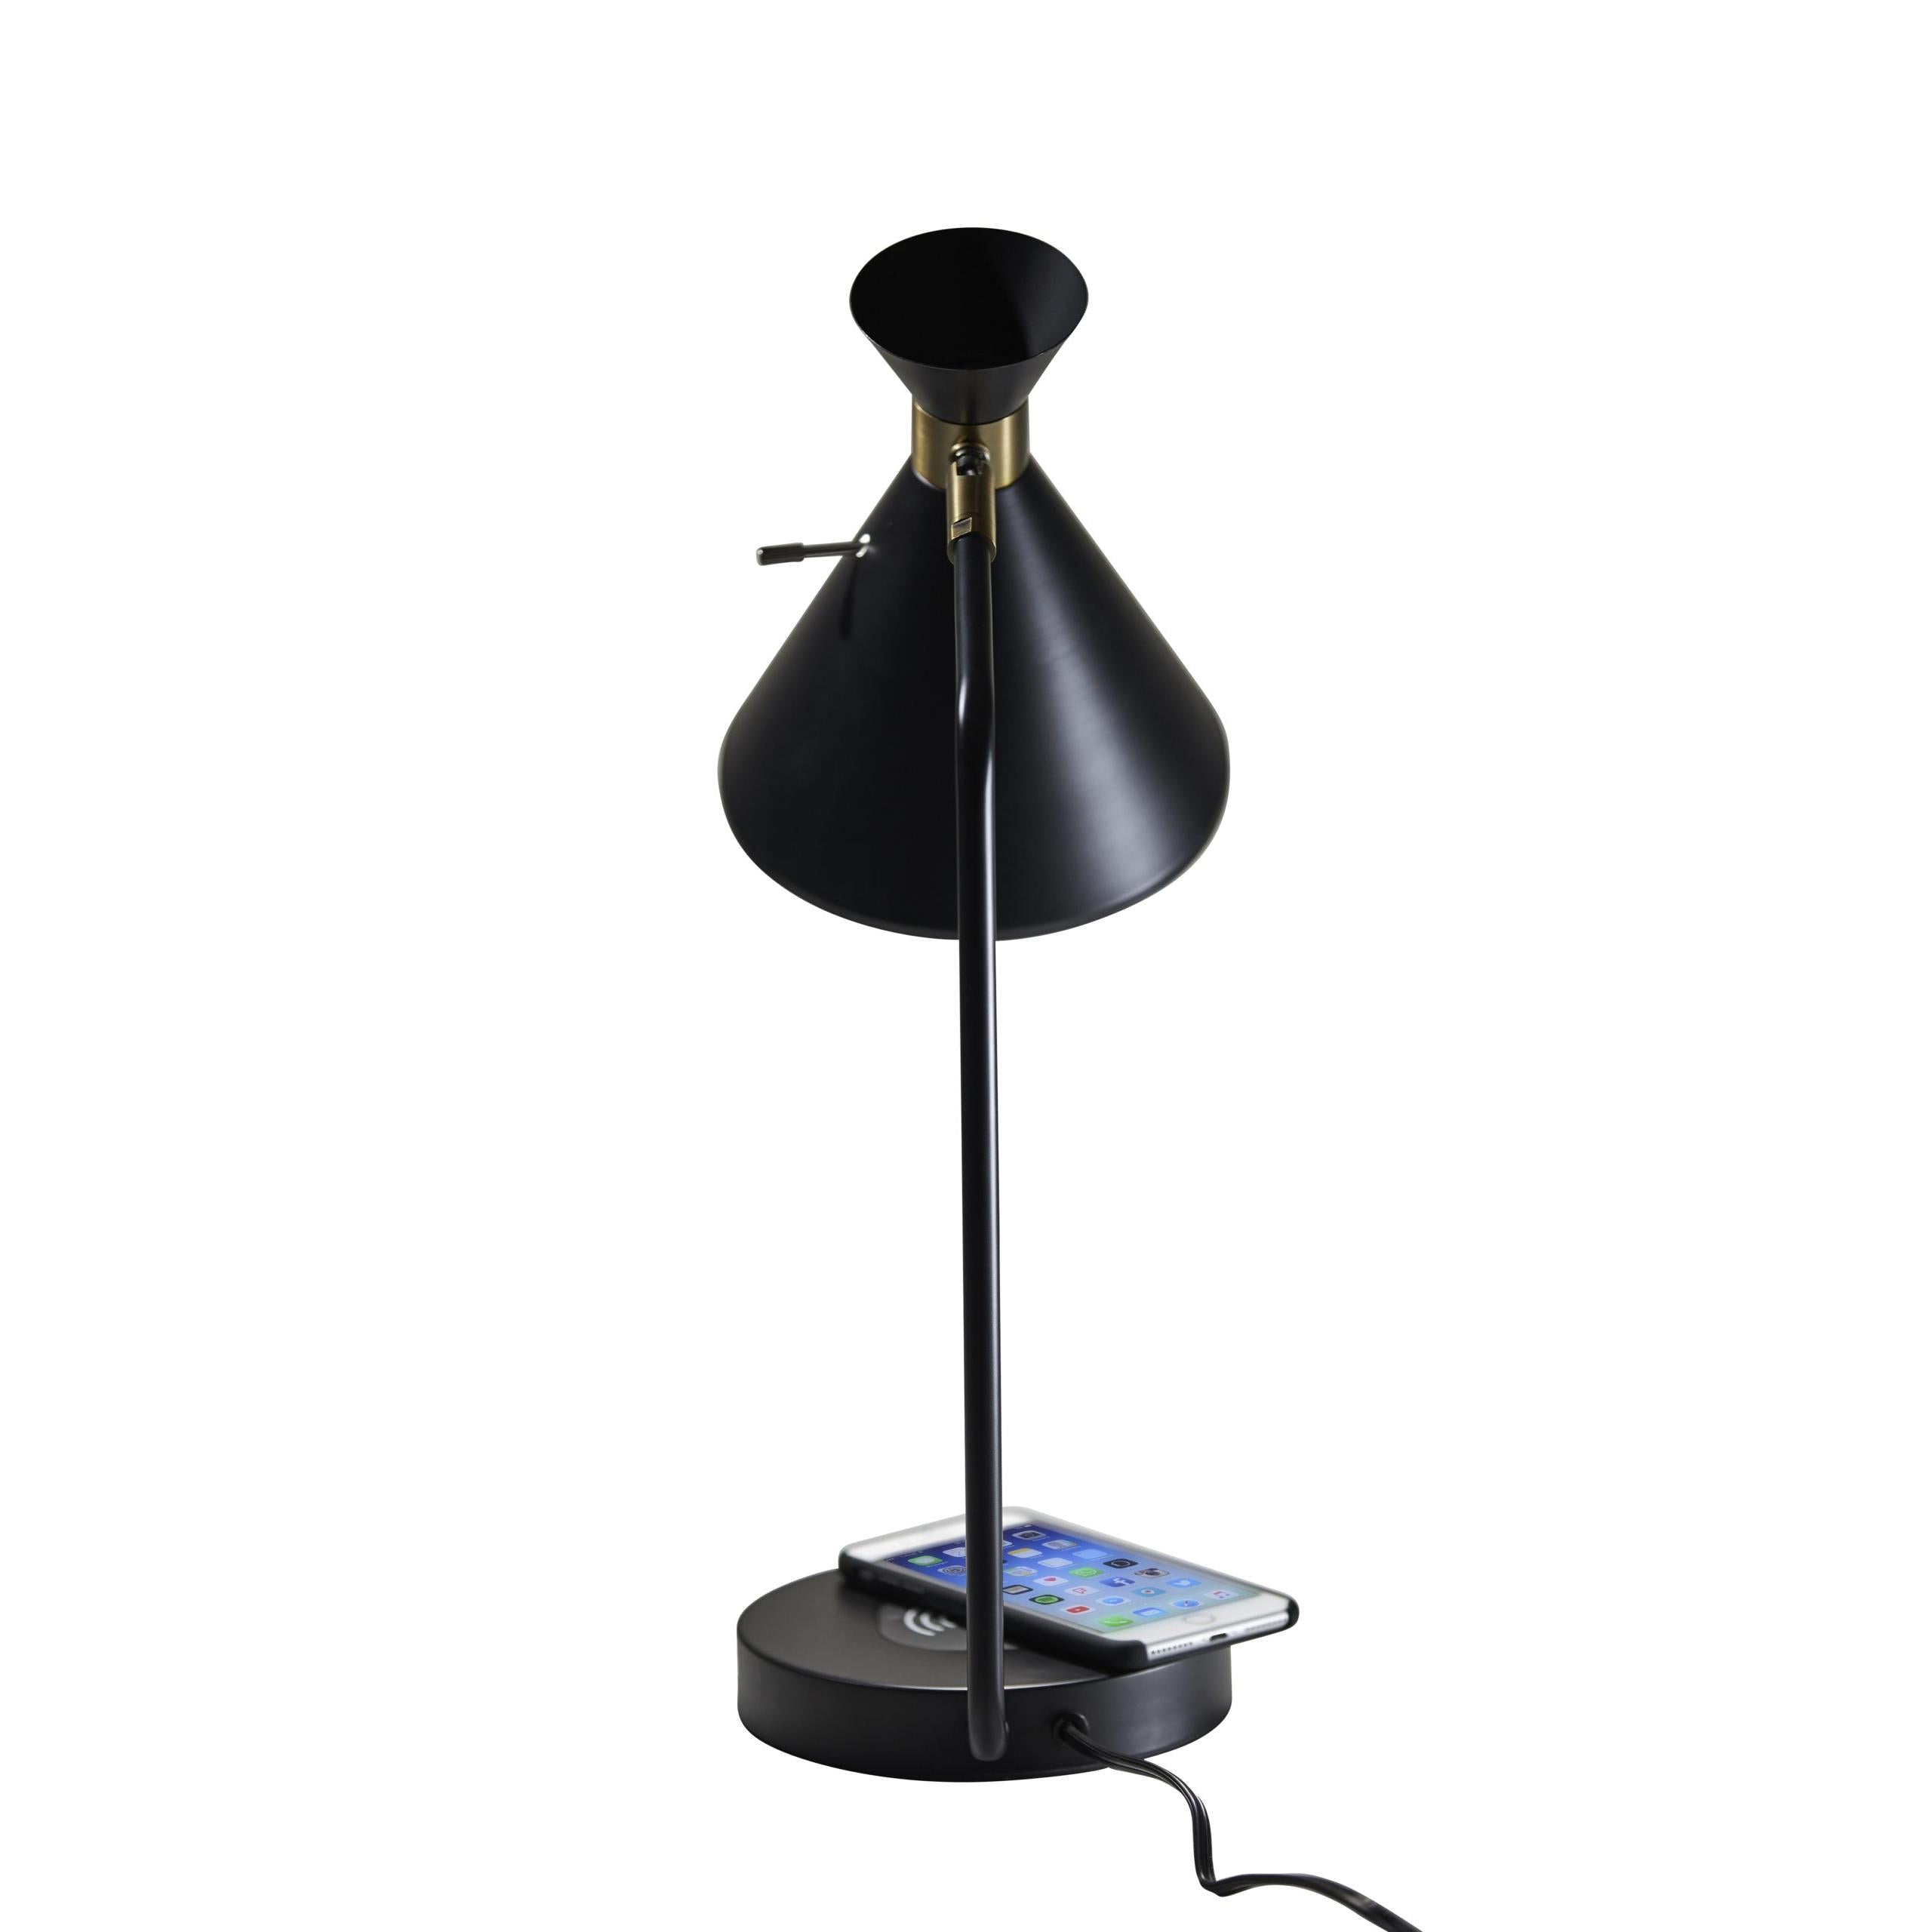 Maxine Table Lamp Charging (back)